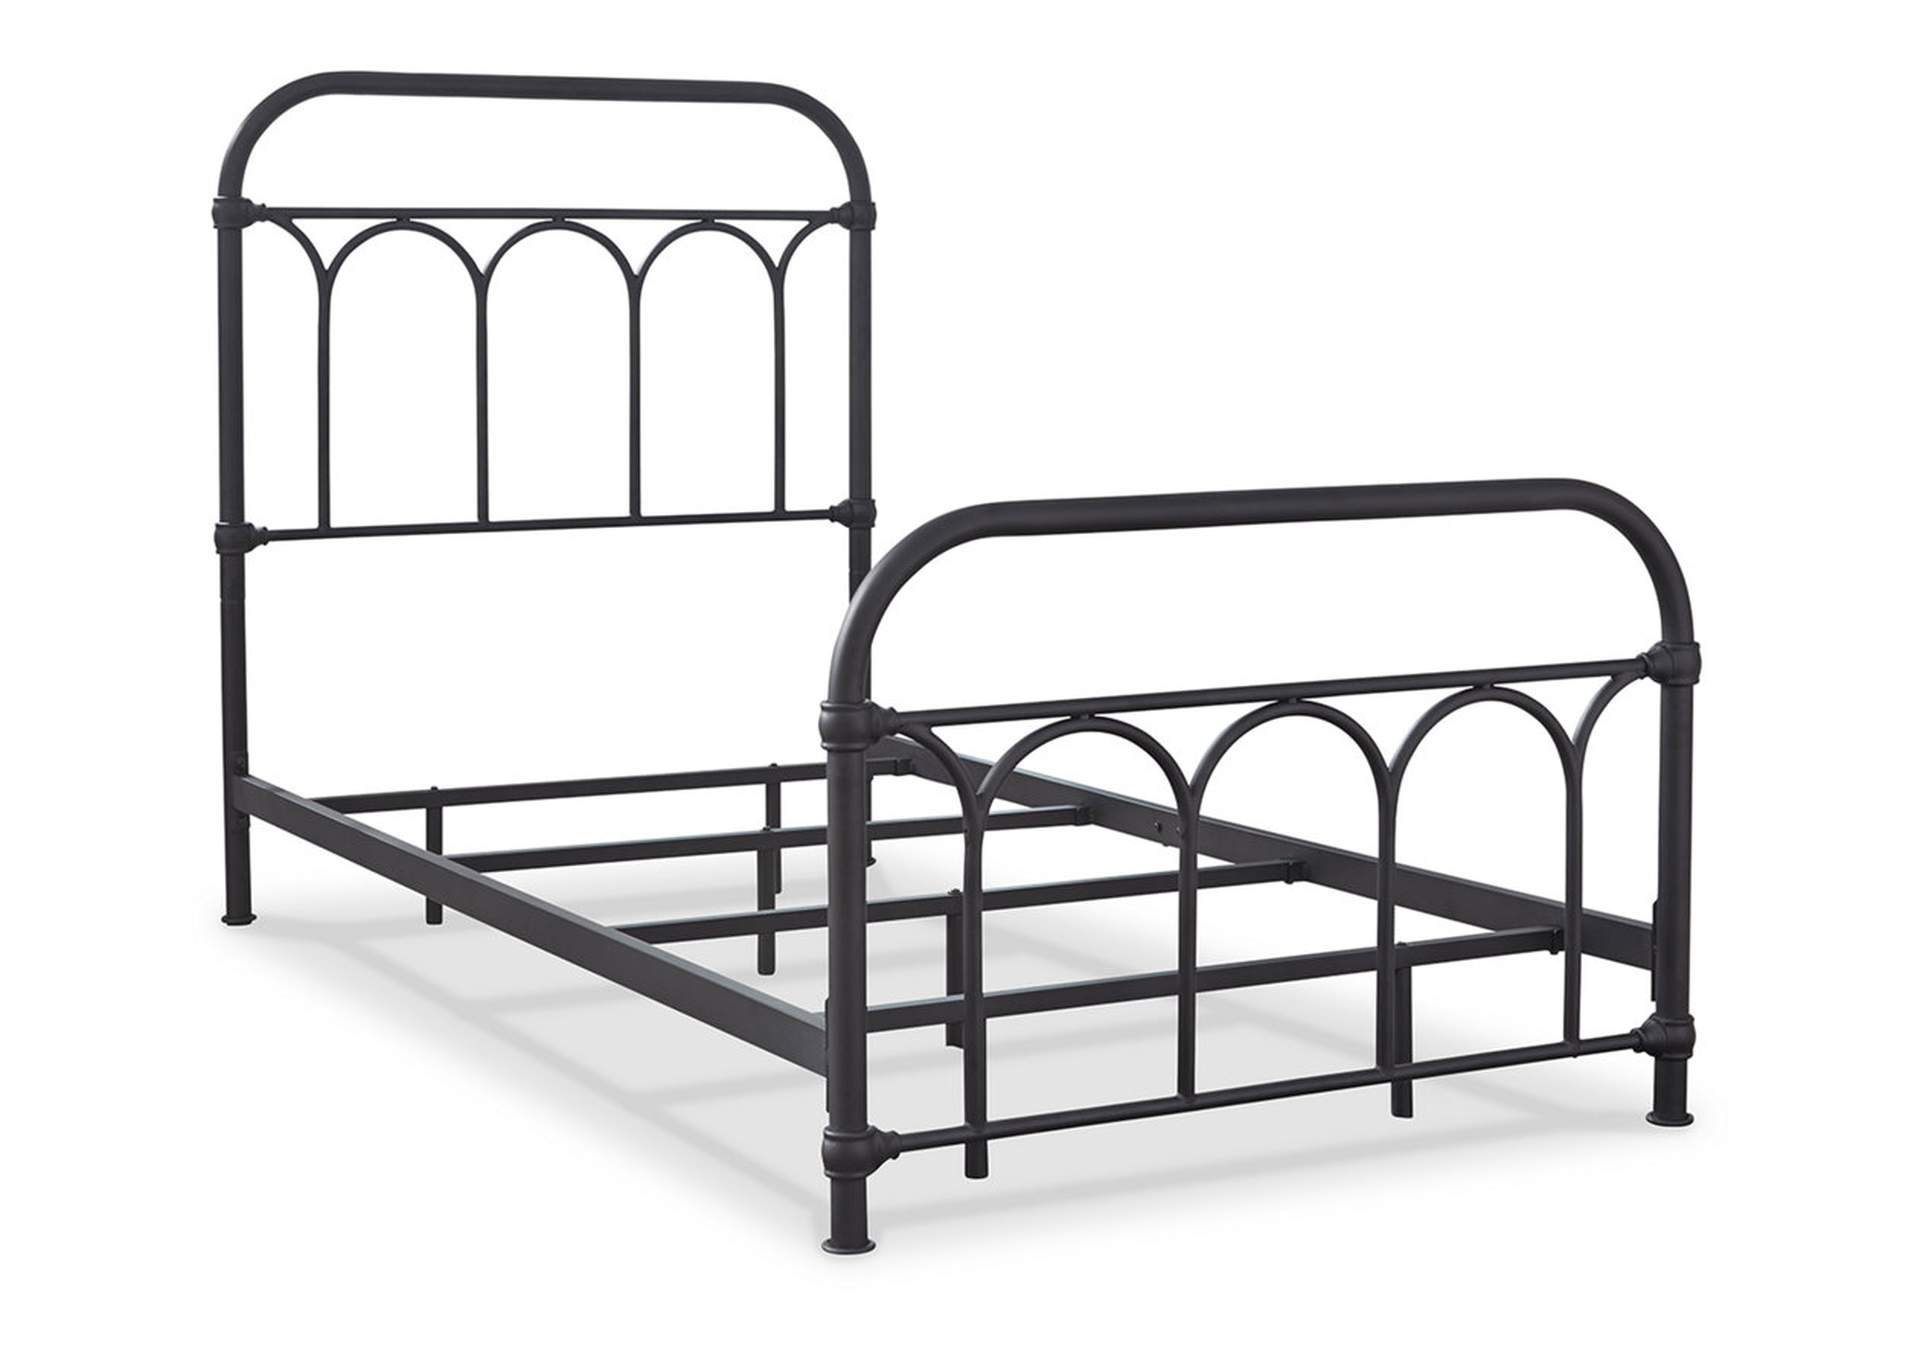 Nashburg Black Twin Metal Bed,Direct To Consumer Express